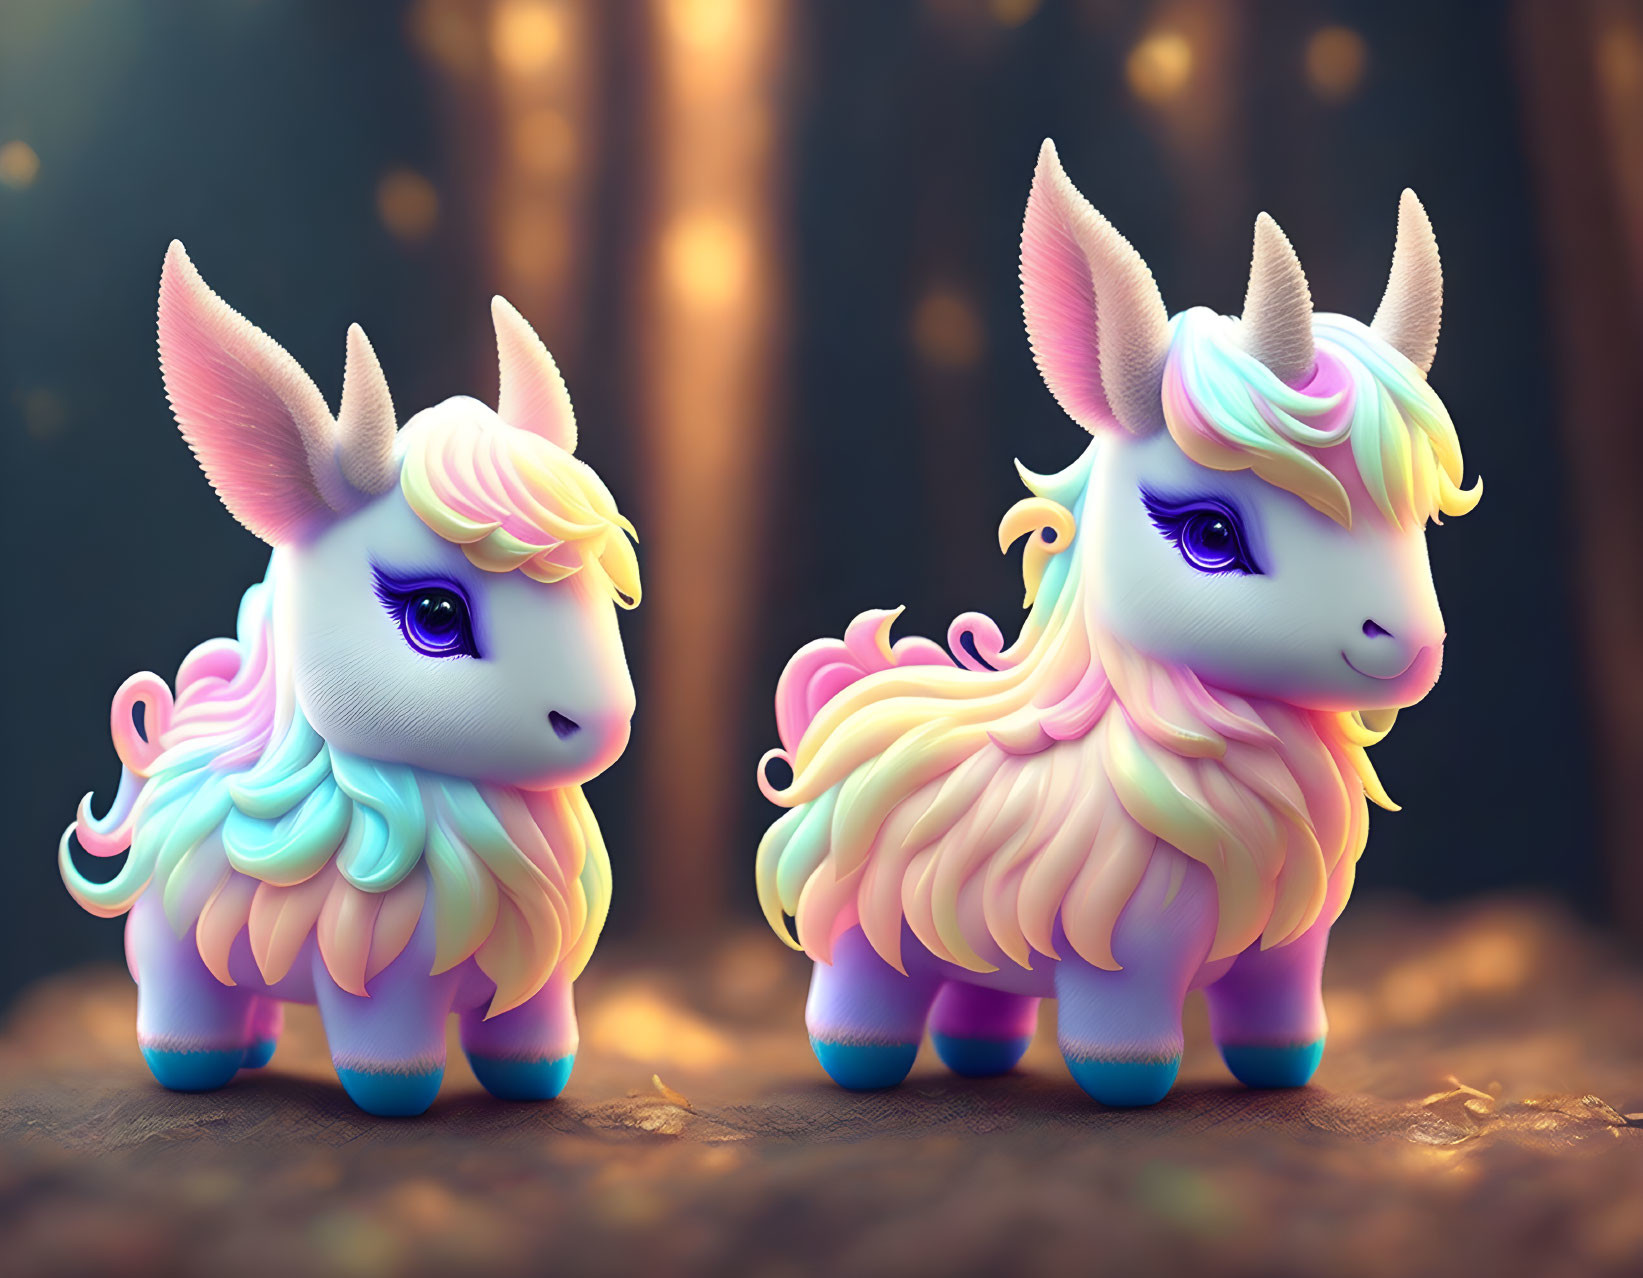 Colorful Stylized Unicorns with Pastel Manes in Mystical Forest